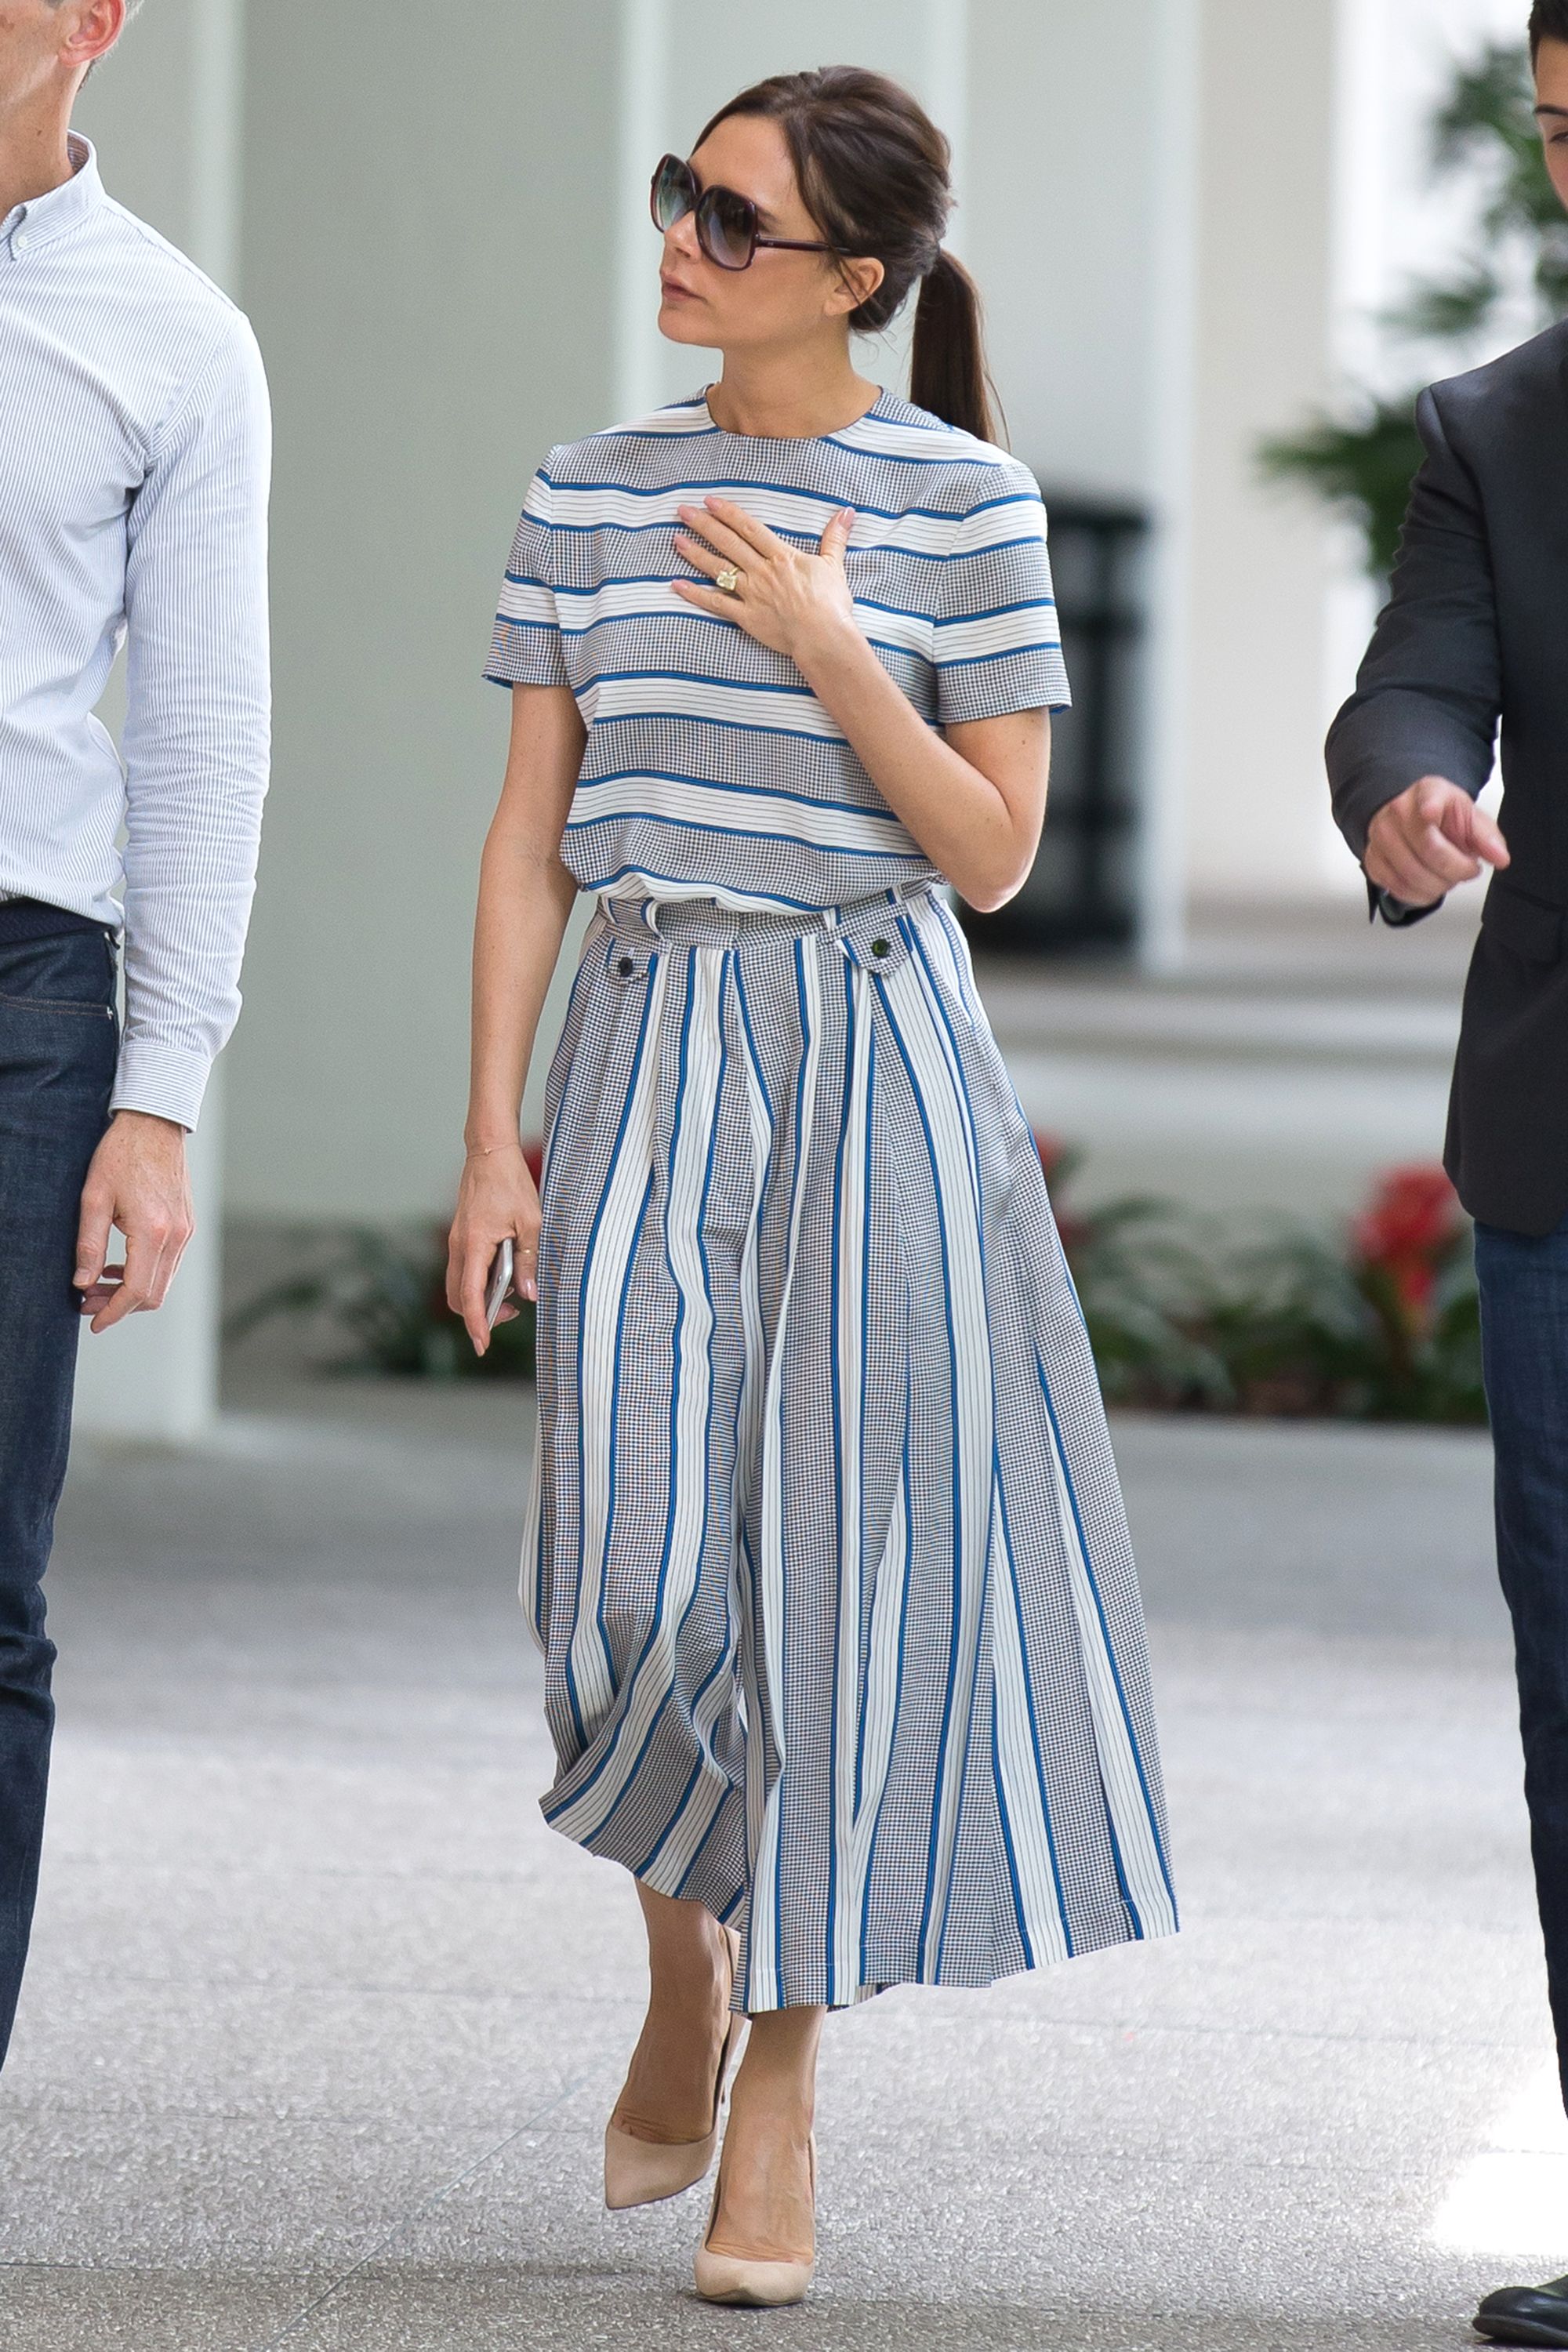 75 Victoria Beckham Looks Pictures Of Victoria Beckham S Style For Her 42nd Birthday